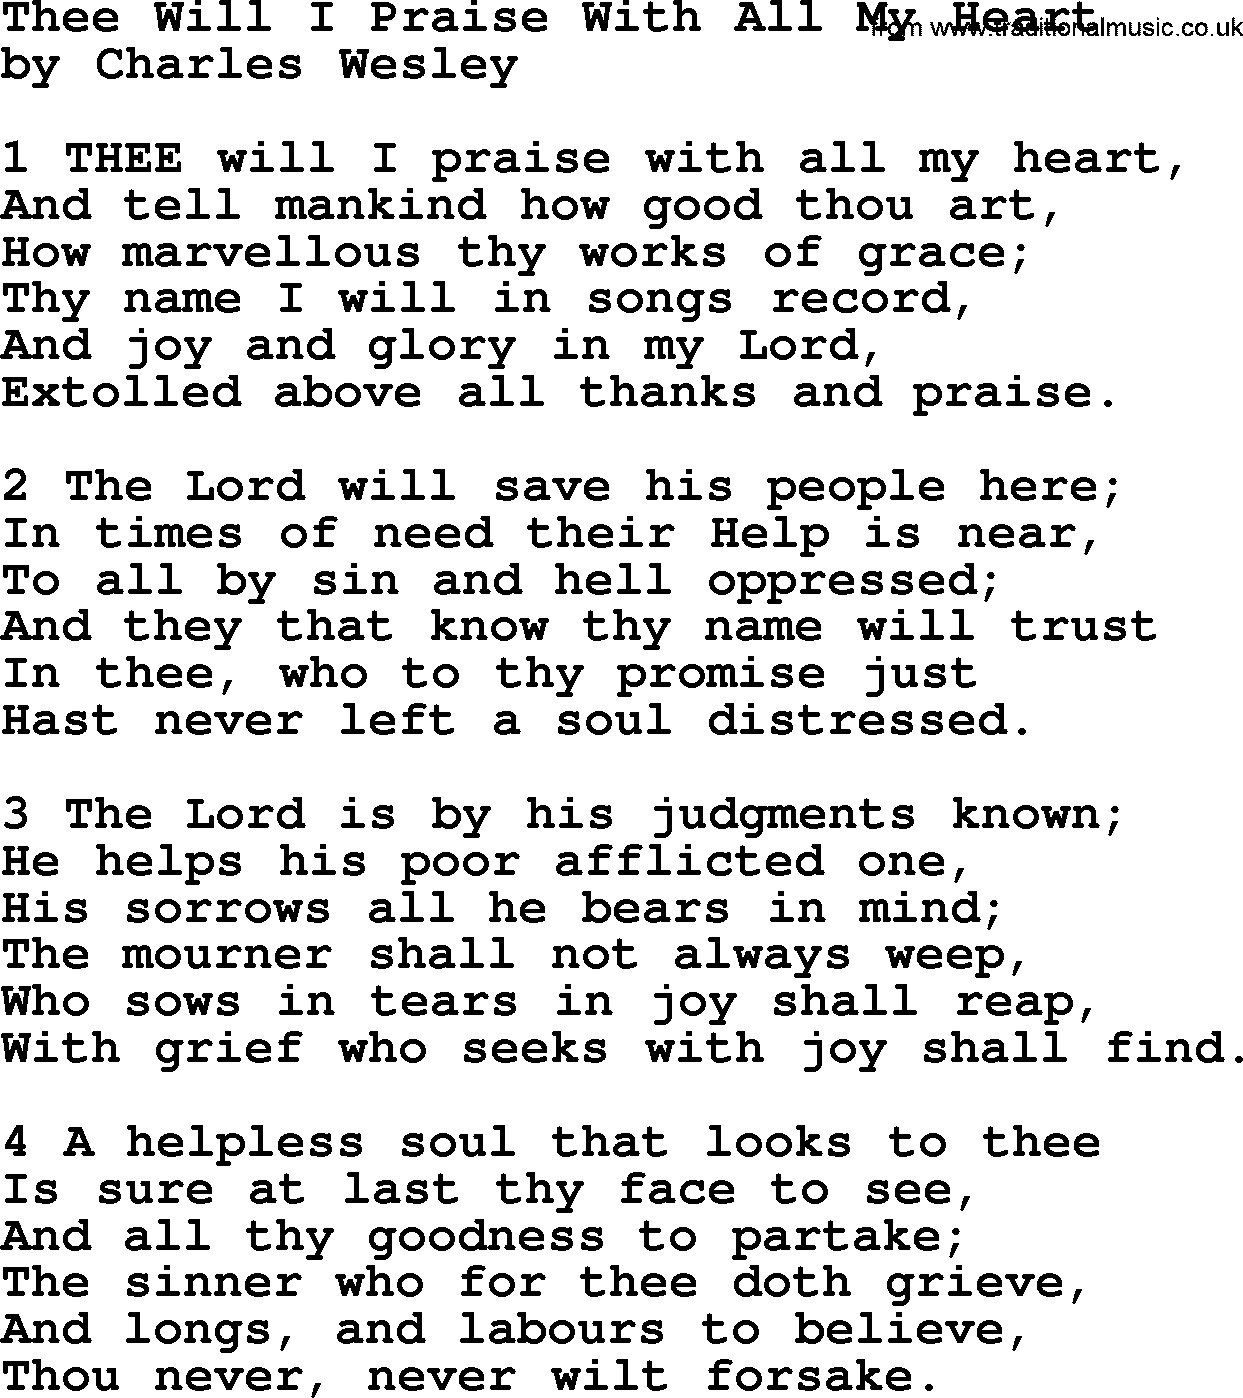 Thee Will I Praise With All My Heart by Charles Wesley - hymn lyrics